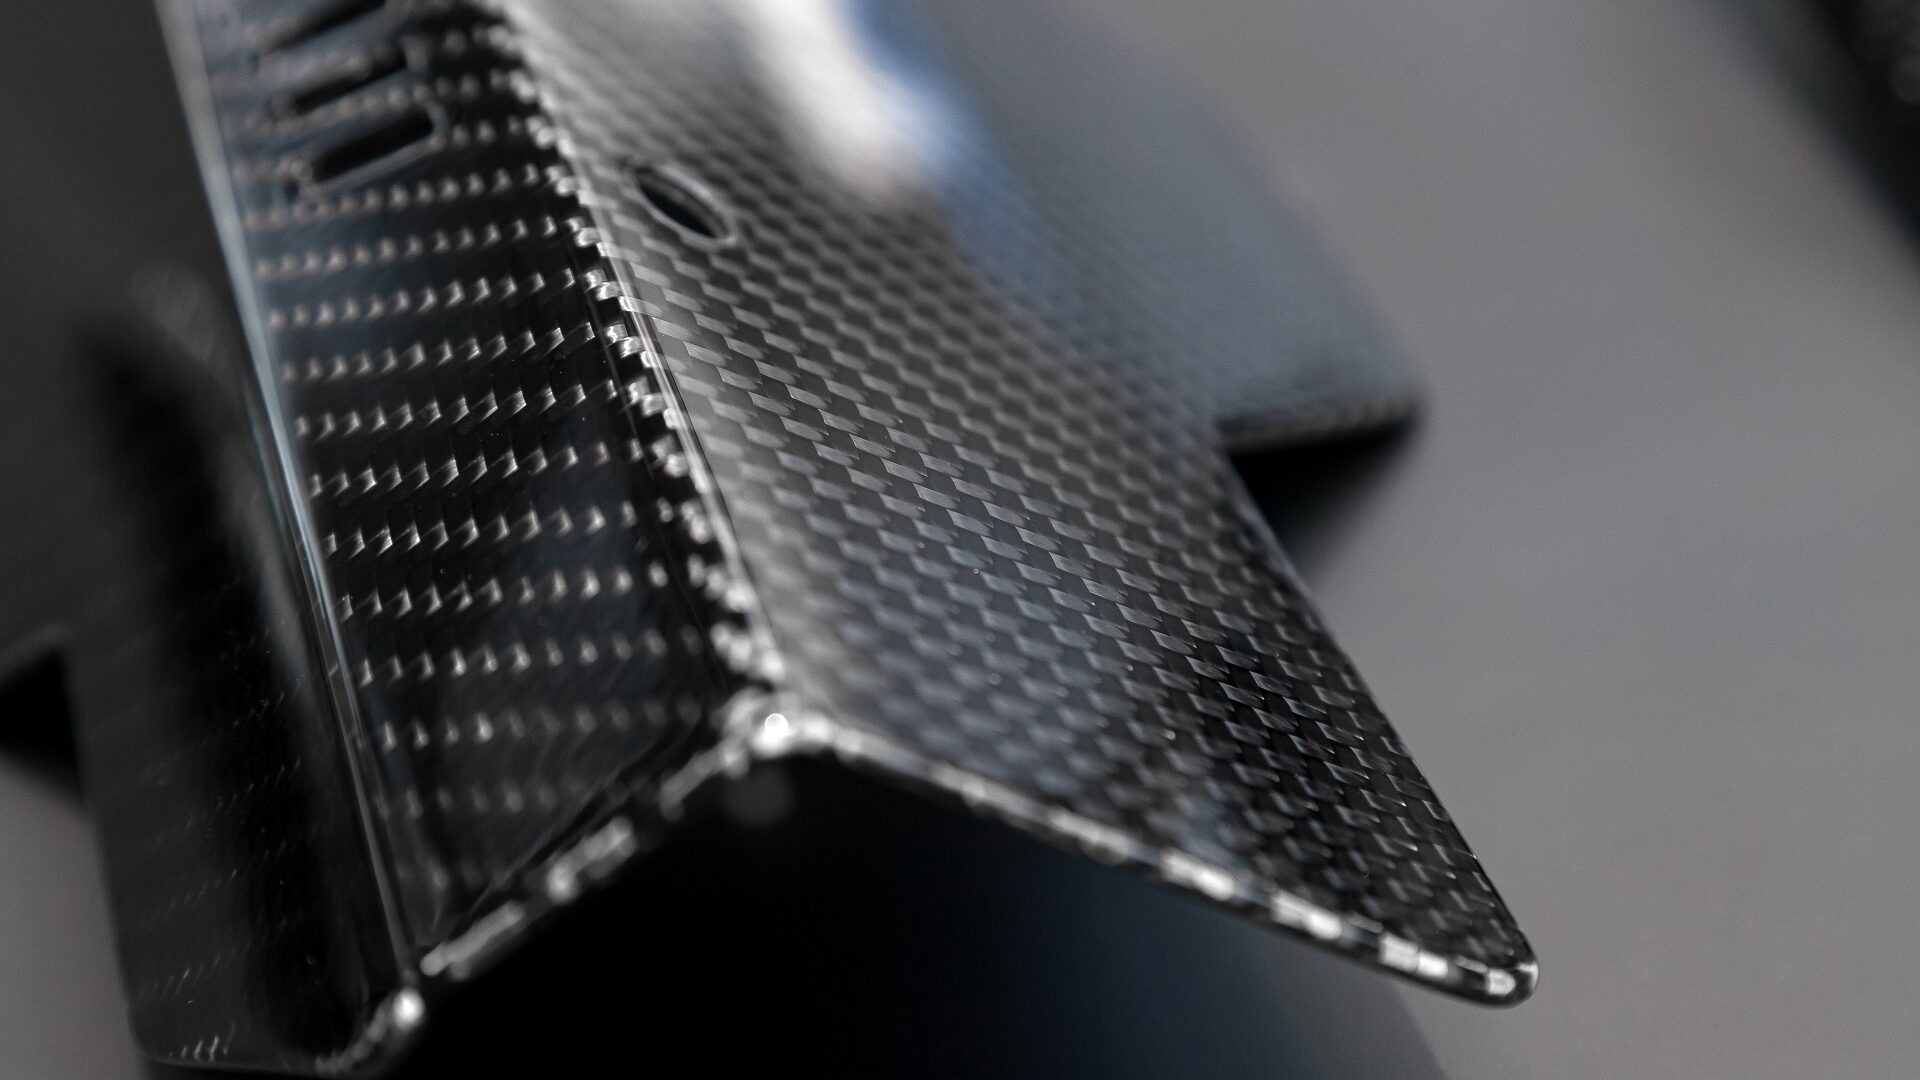 Upclose of composite material that has been finished